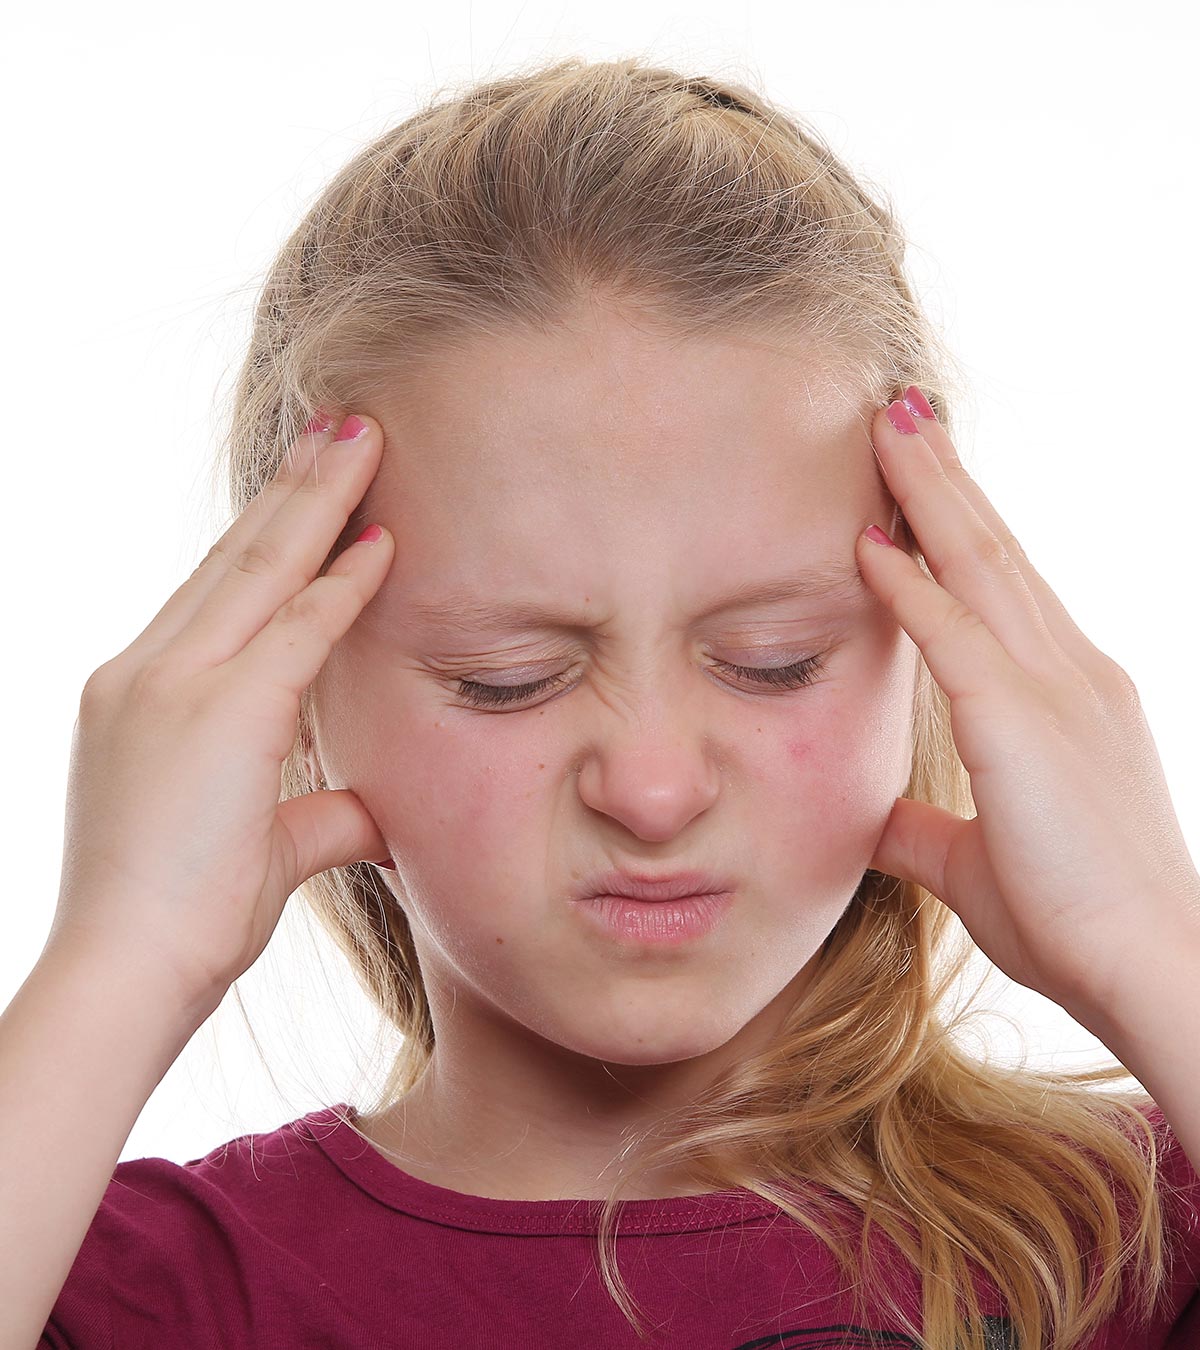 Puberty Headaches - Everything You Need To Know